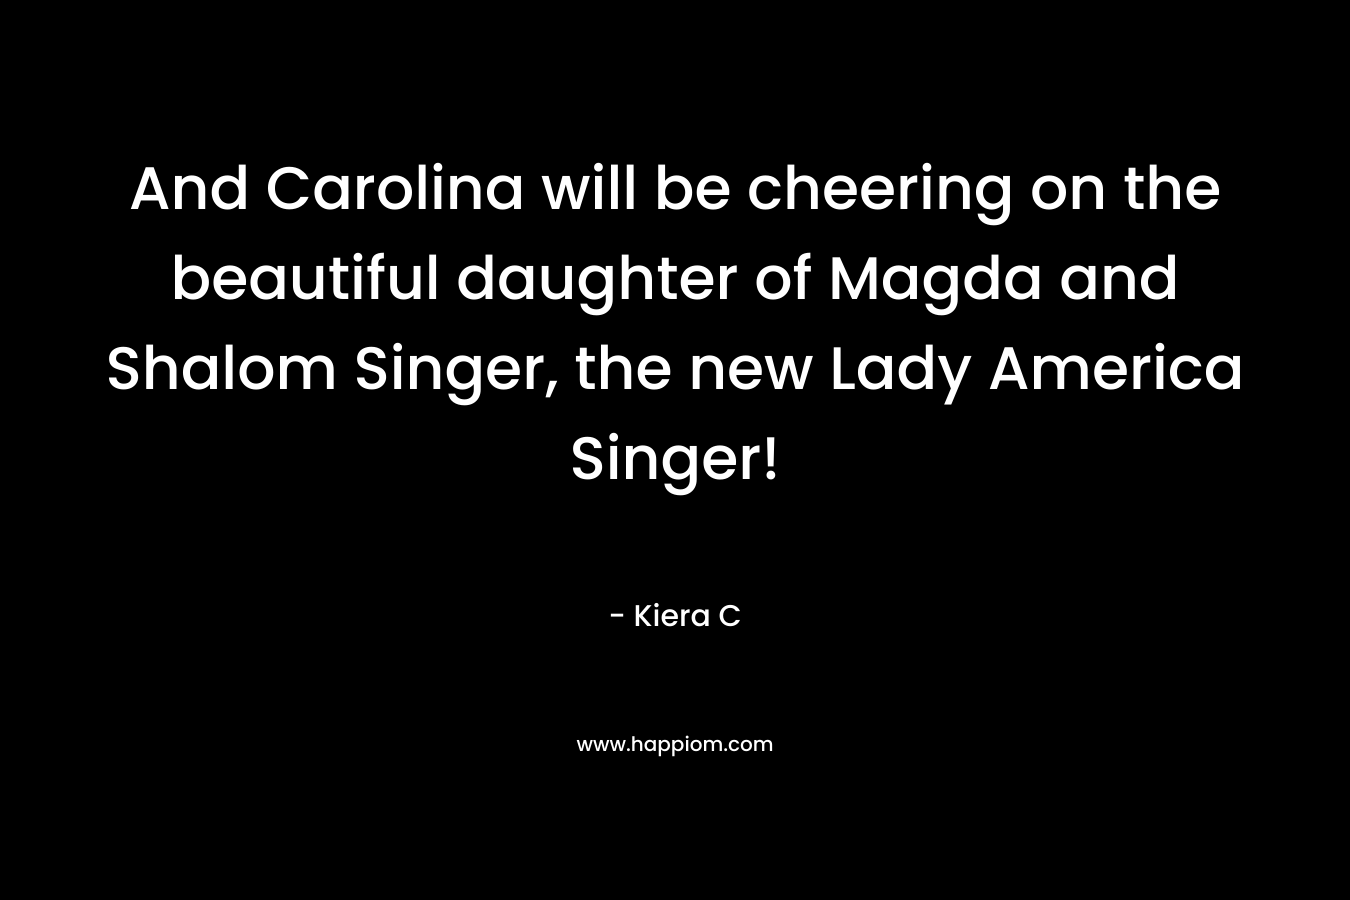 And Carolina will be cheering on the beautiful daughter of Magda and Shalom Singer, the new Lady America Singer! – Kiera C